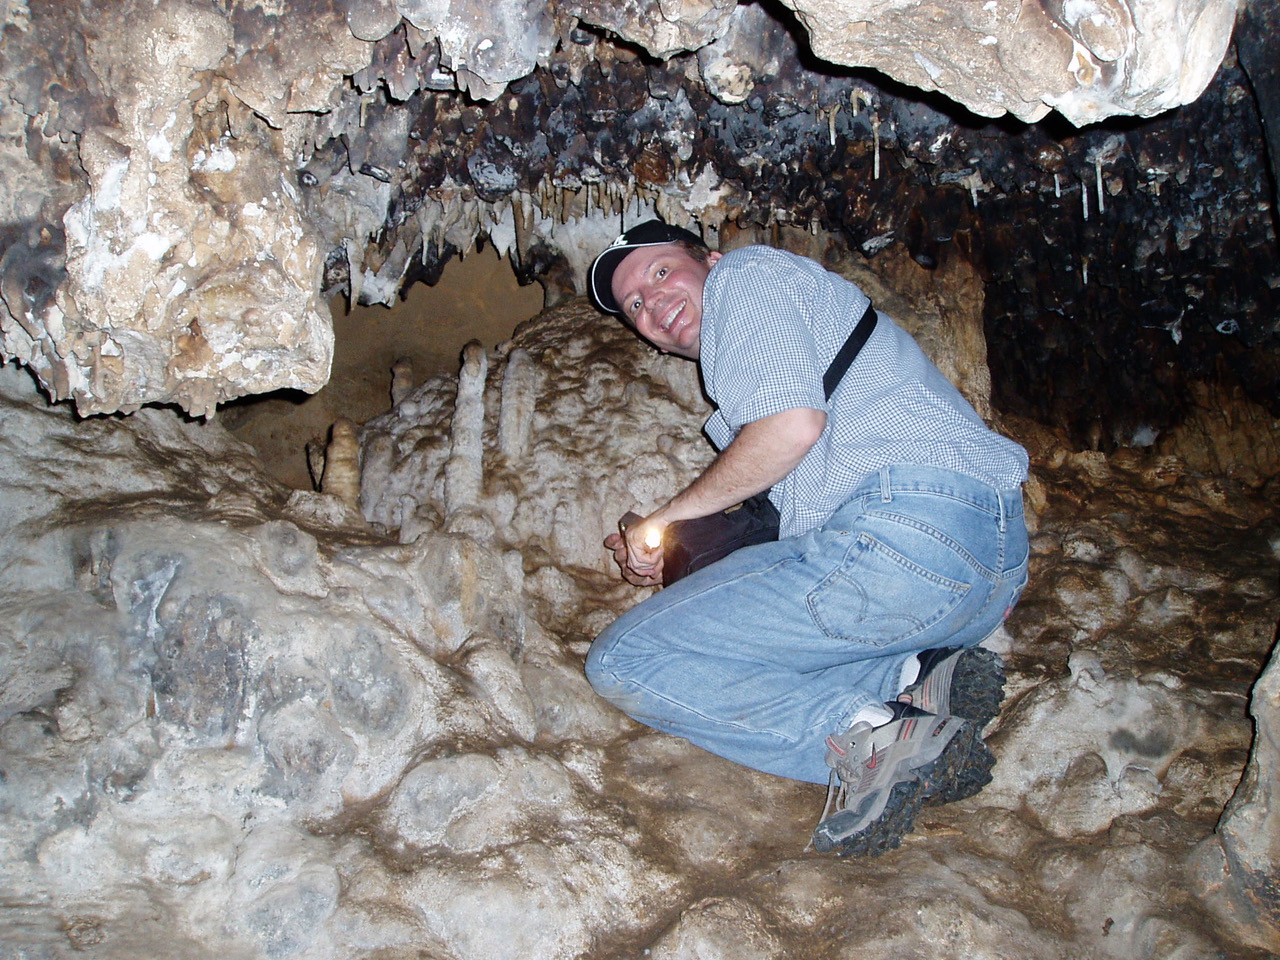 Dave Hodell sampling speleothems from a cave in Yucatan, Mexico; image credit Mark Brenner